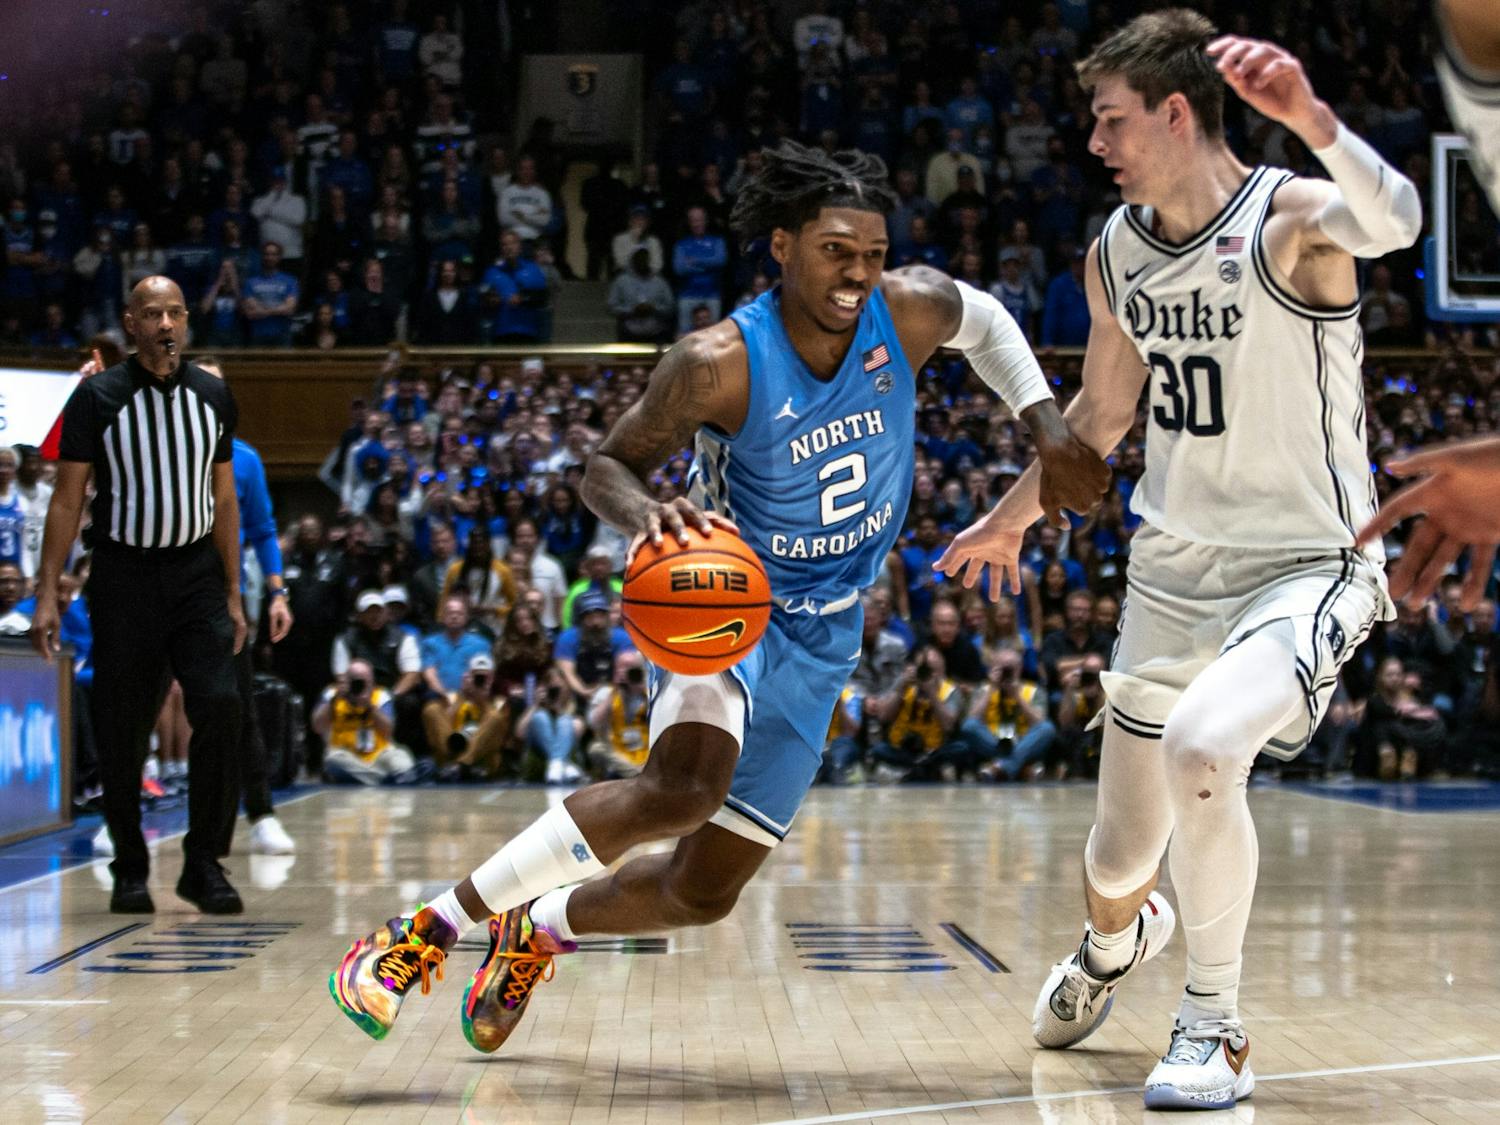 UNC junior guard Caleb Love (2) dribbles the ball during the men's basketball game against Duke on Feb. 4, 2023 at Cameron Indoor Stadium. UNC lost 63-57.